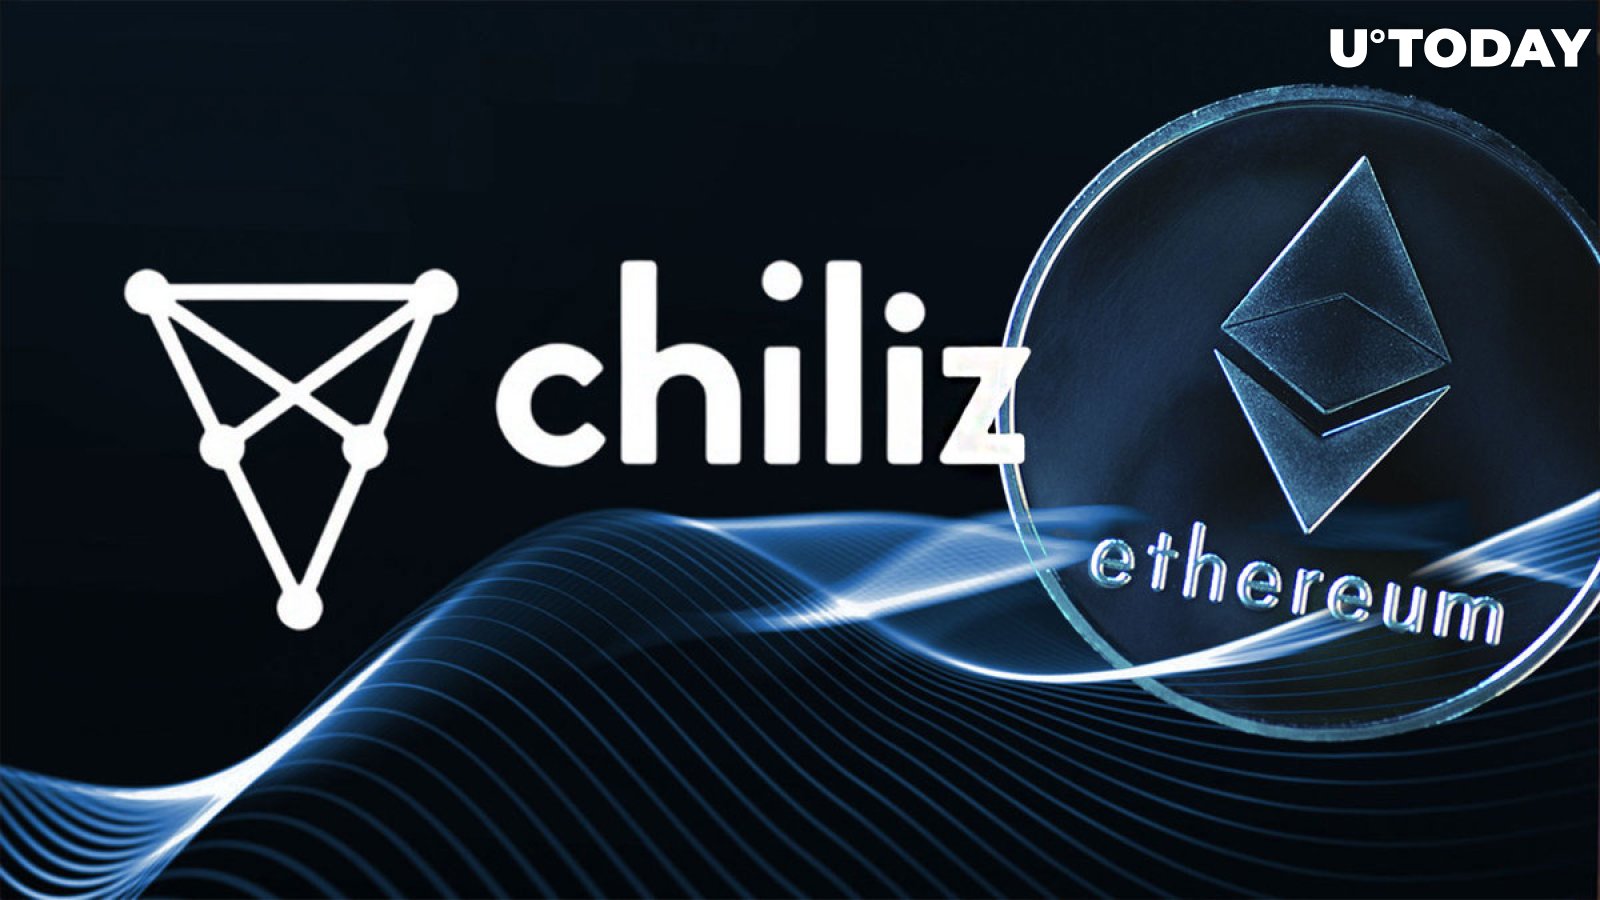 Chiliz (CHZ)-Ethereum Bridge Officially Goes Live, Here's What to Know